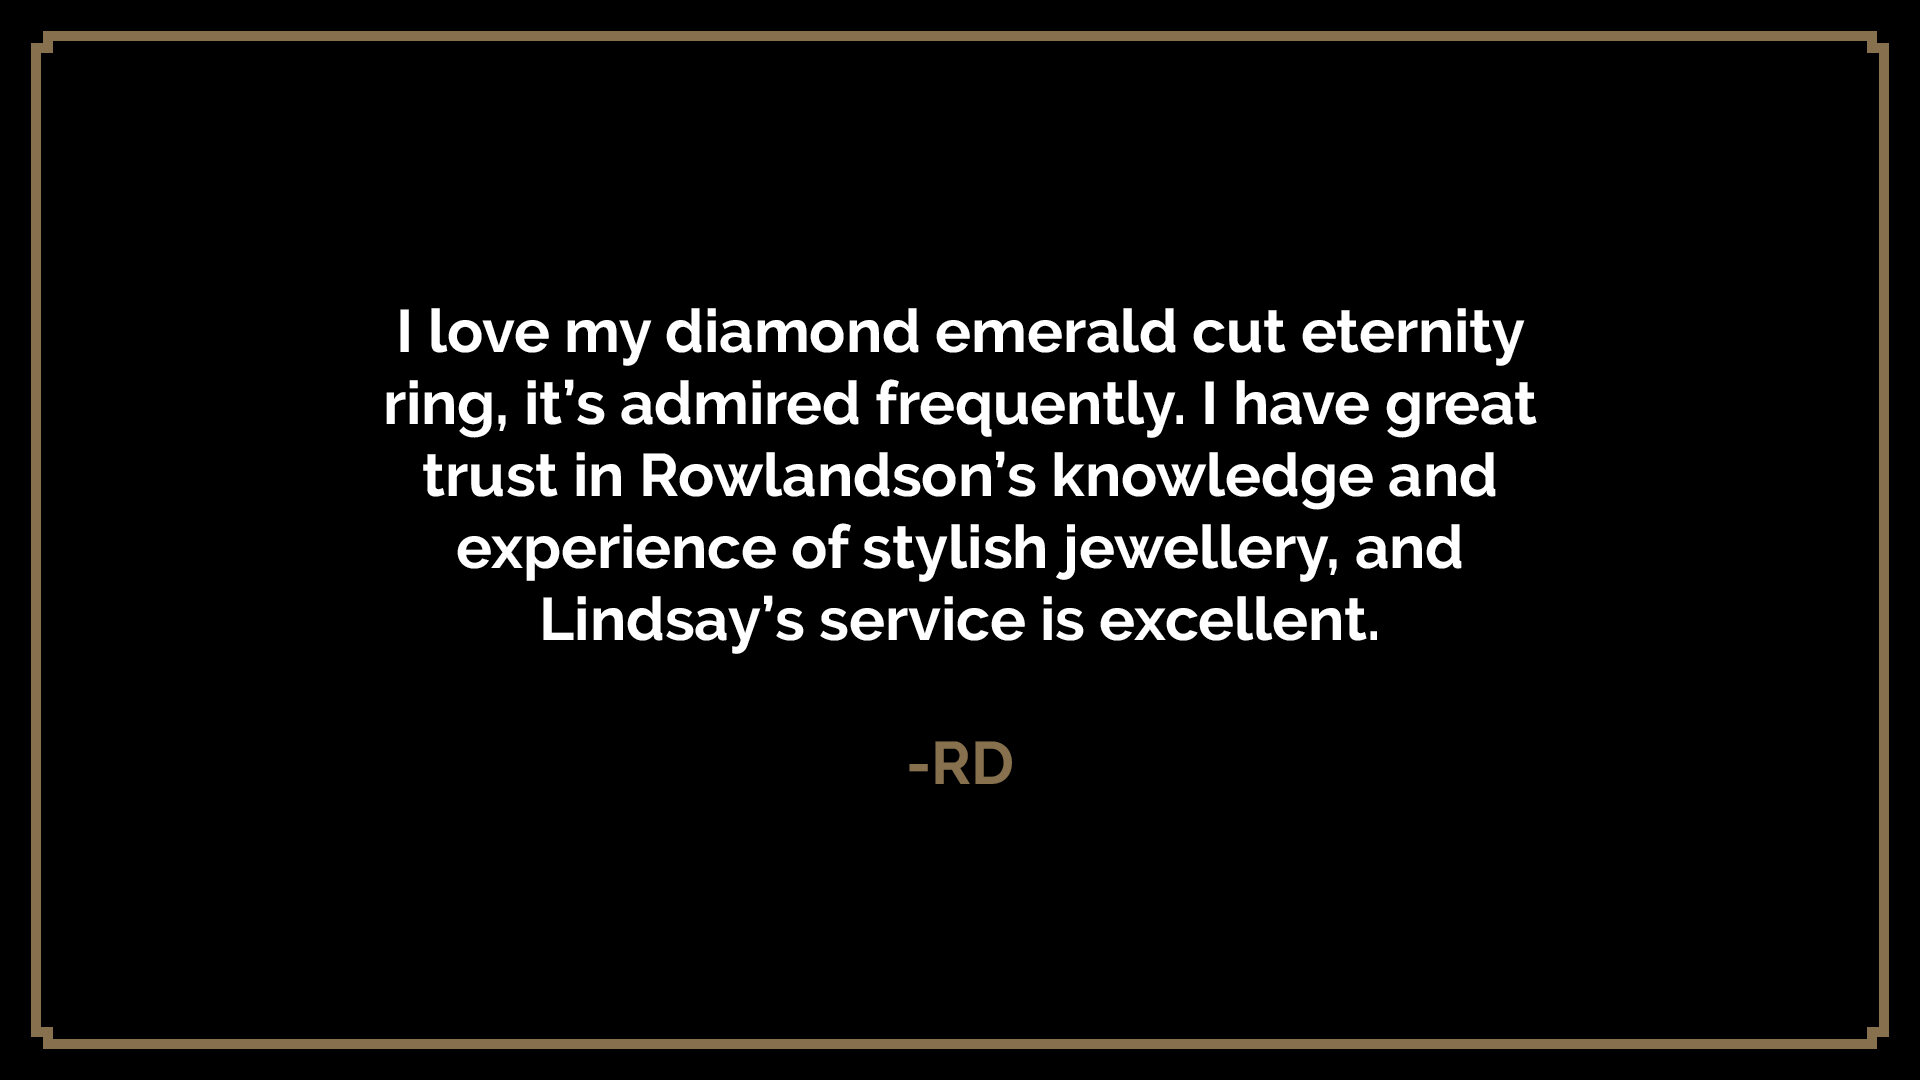  I love my diamond emerald cut eternity ring, it’s admired frequently. I have great trust in Rowlandson’s knowledge and experience of stylish jewellery, and Lindsay’s service is excellent.  -RD 